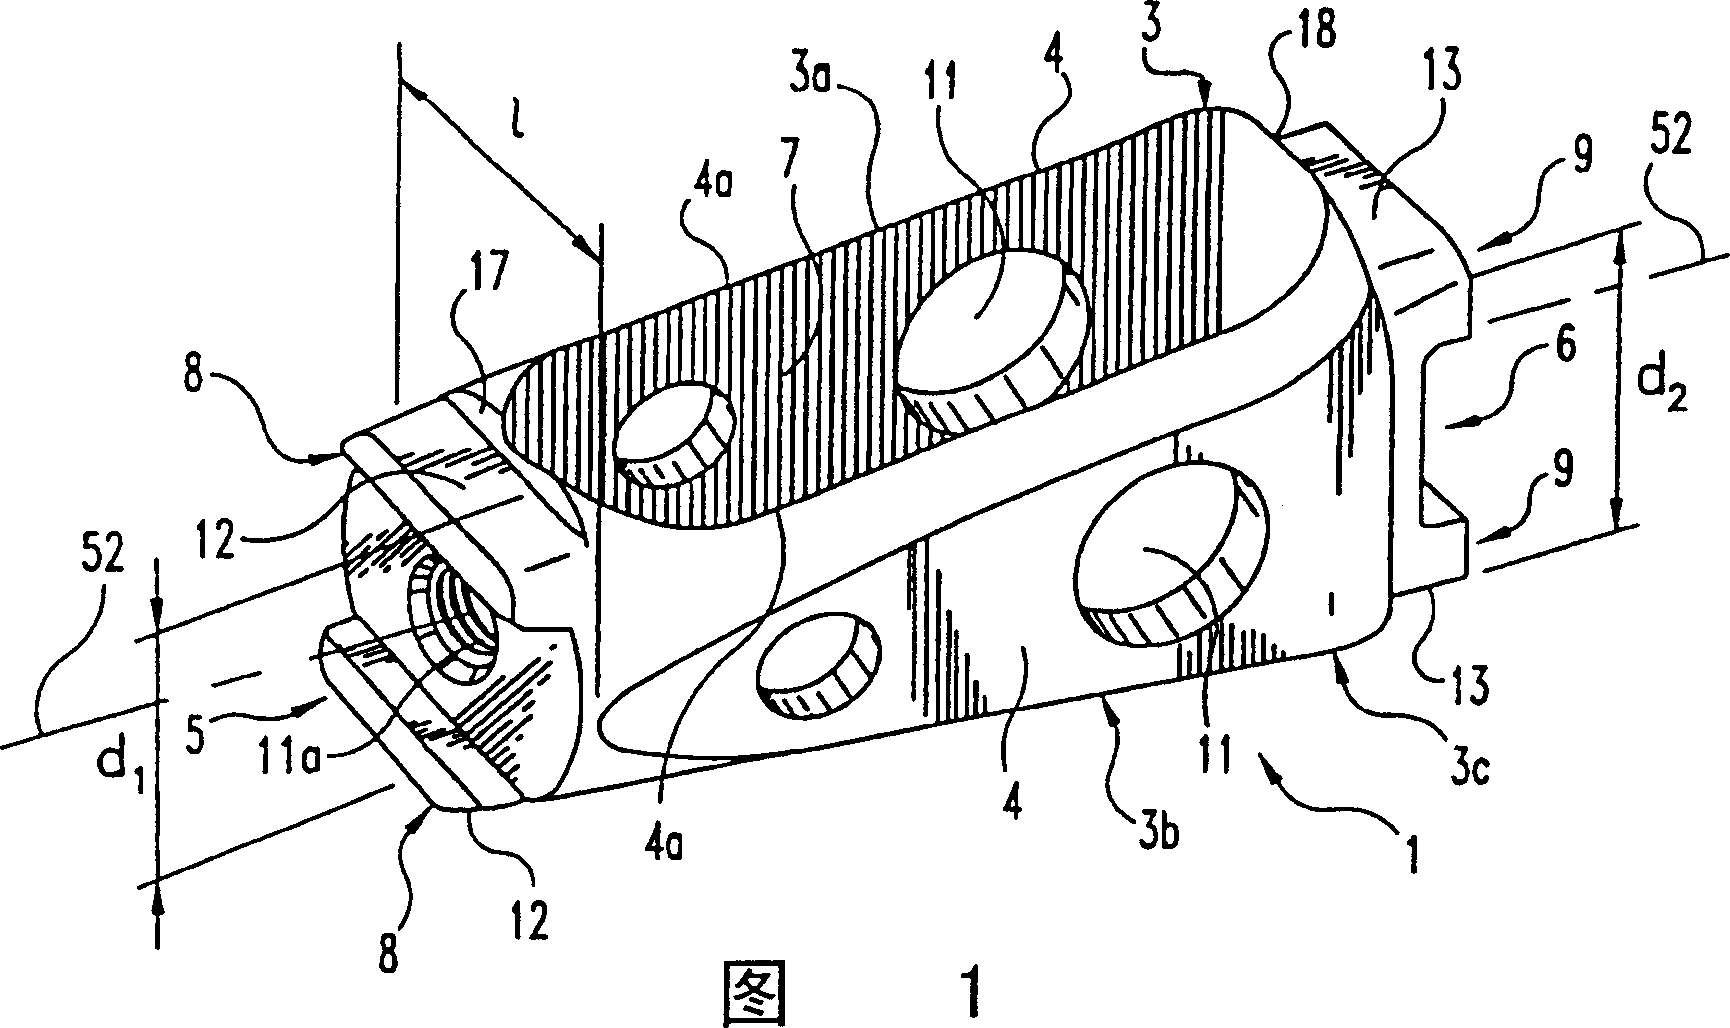 Spinal implant and cutting tool preparation accessory for mounting implant